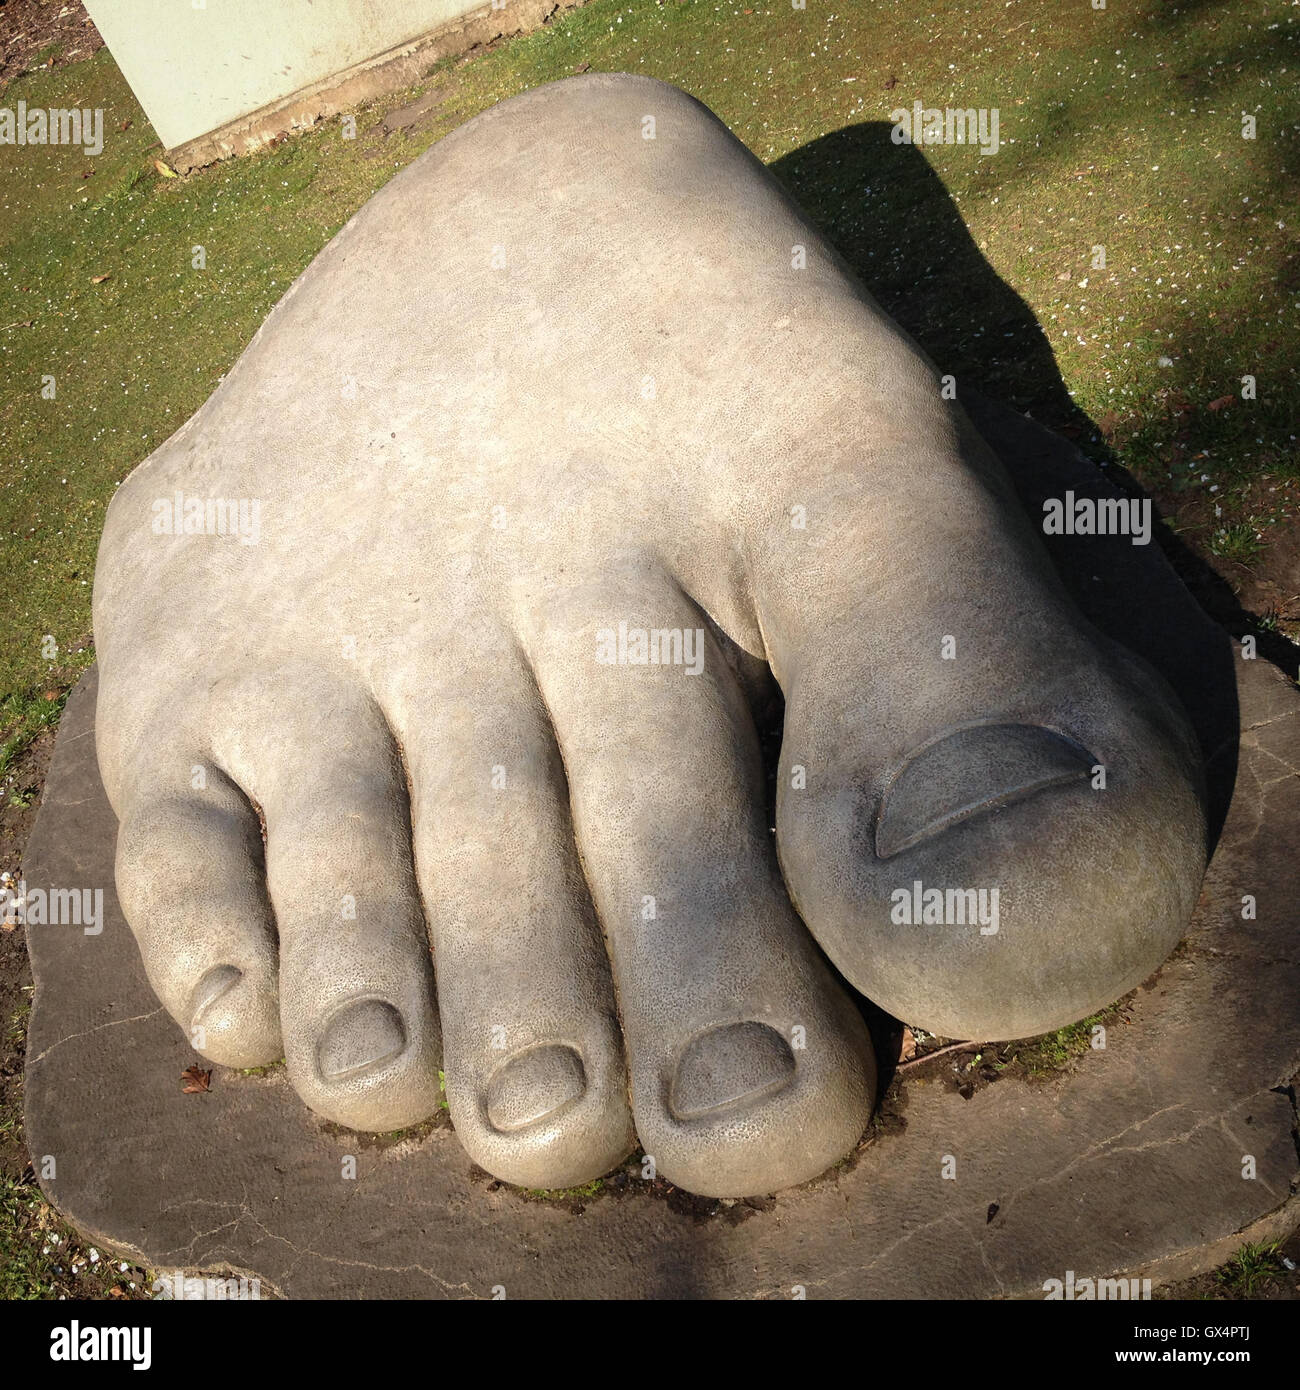 Sculpture of foot and toes in Bellahouston park, in Glasgow, Scotland. Stock Photo